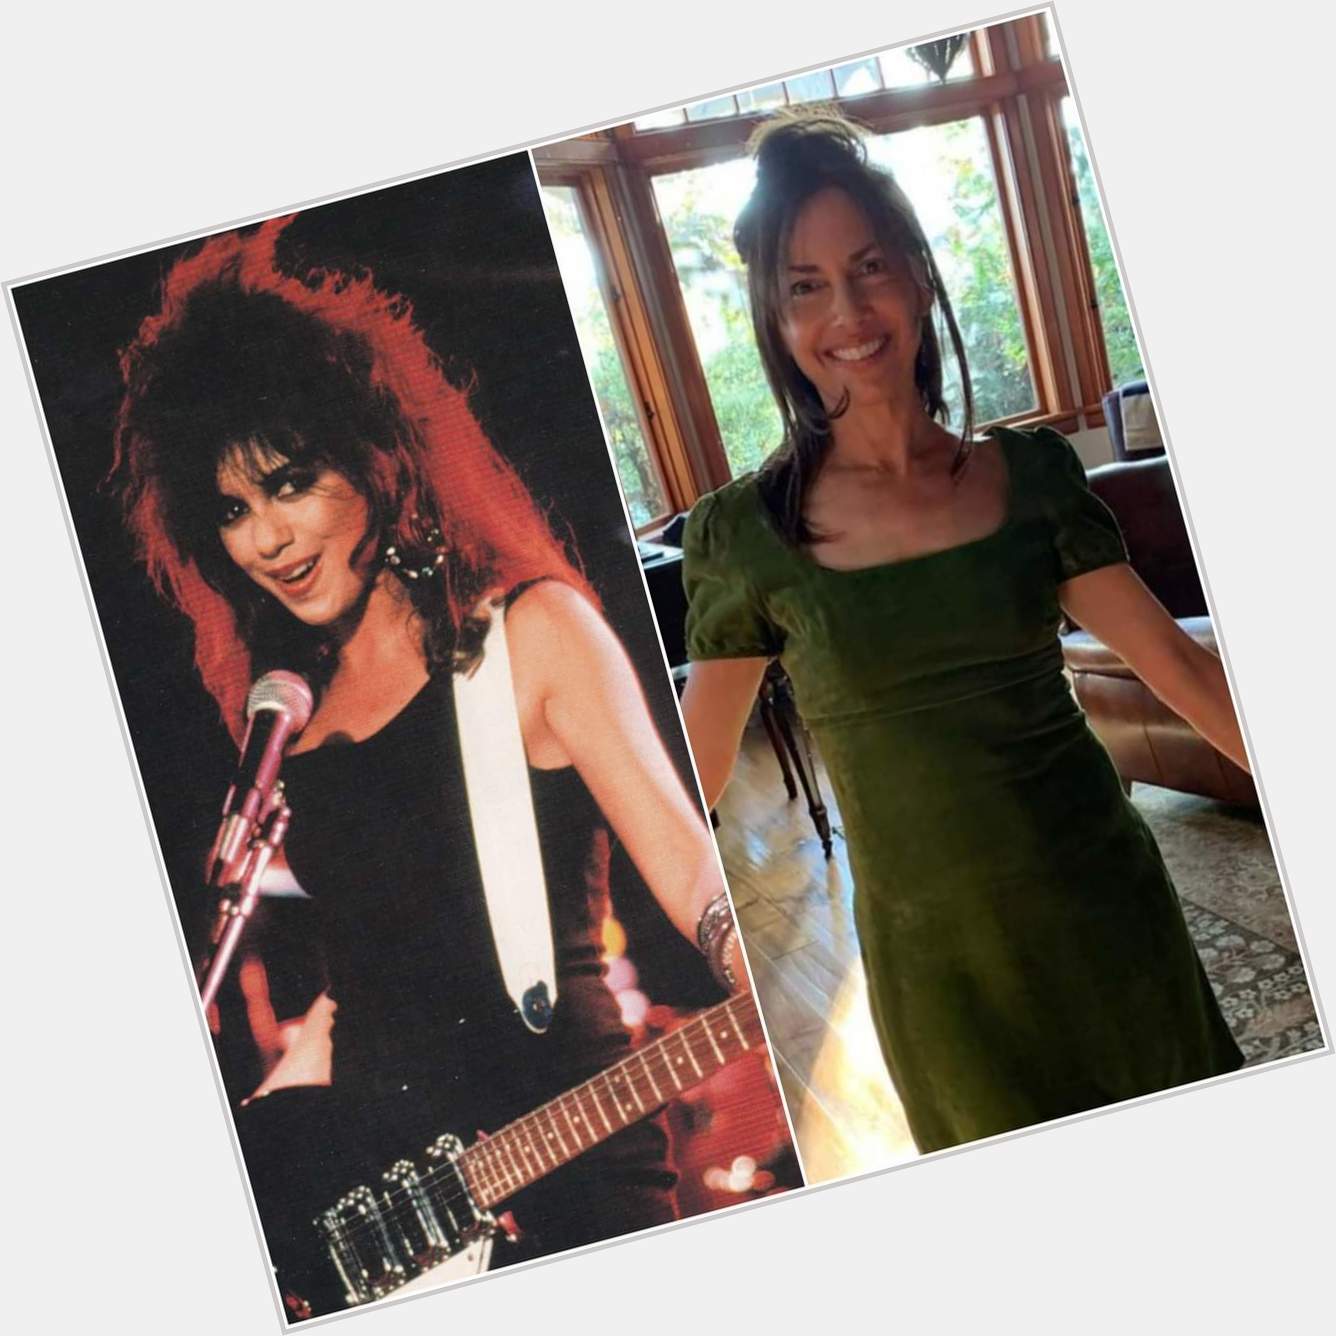 Happy birthday to Susanna Hoffs! The former lead singer of The Bangles is 64 today. 